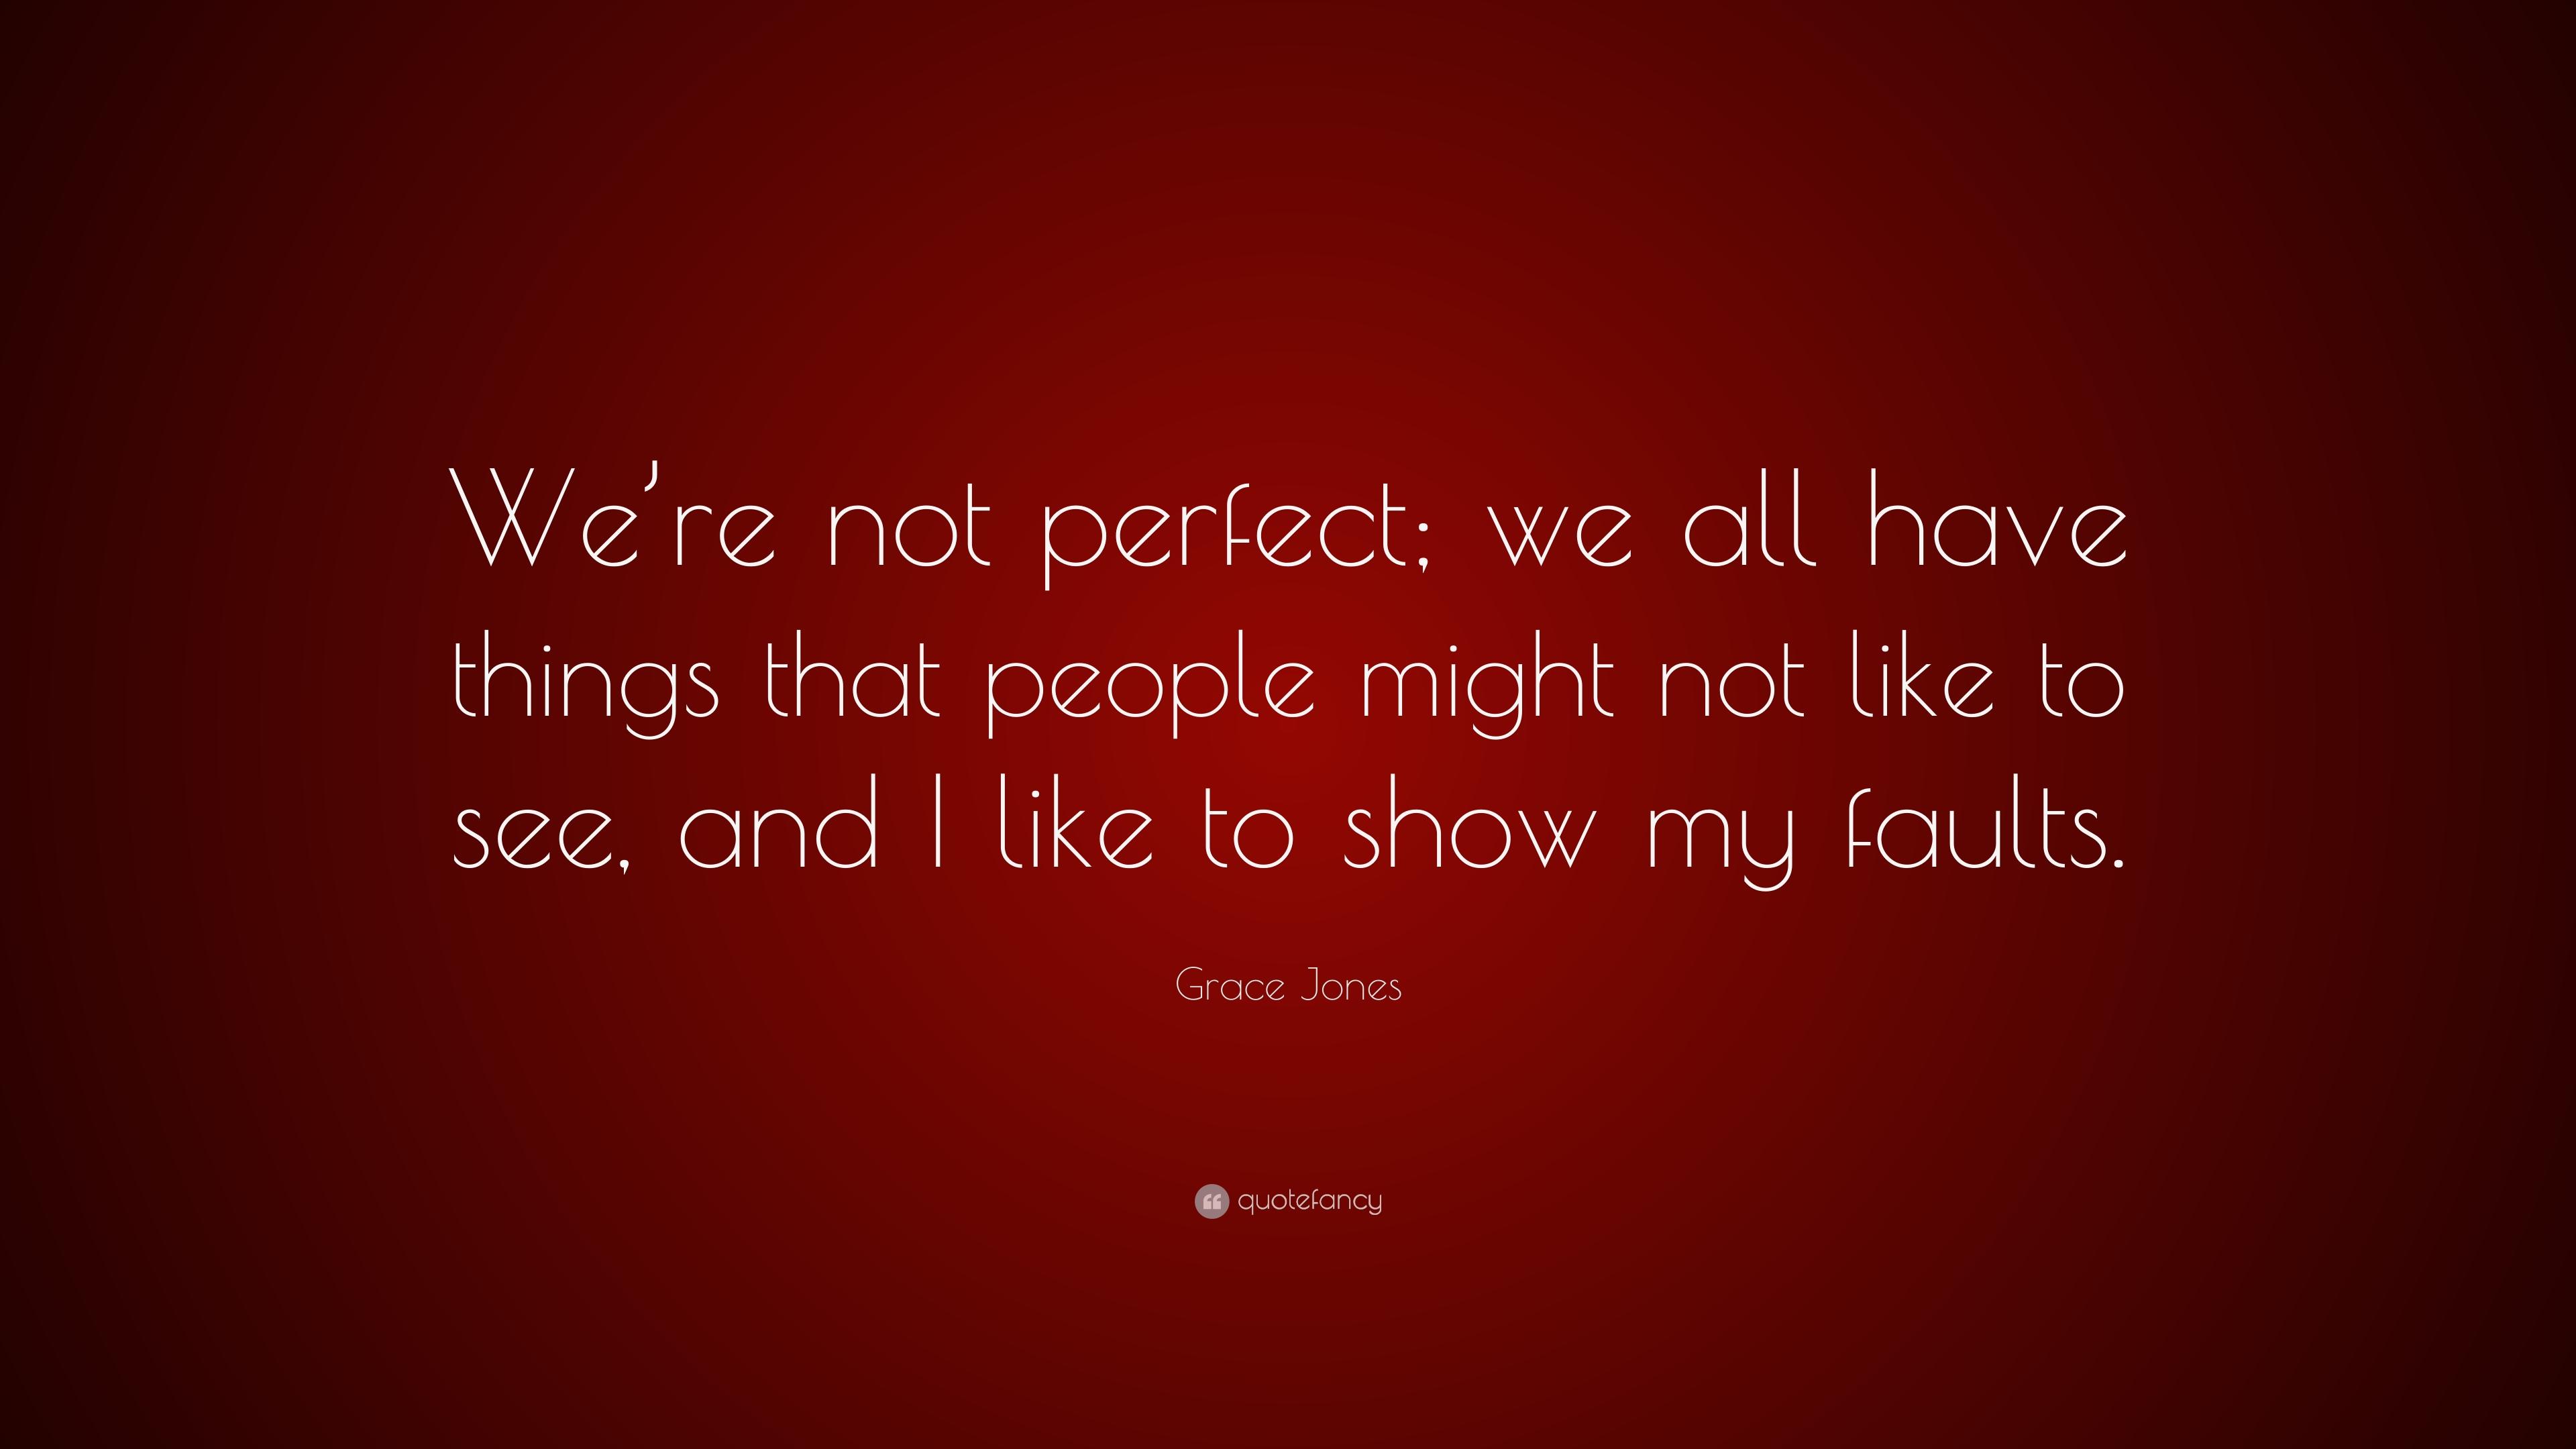 Grace Jones Quote: “We're not perfect; we all have things that